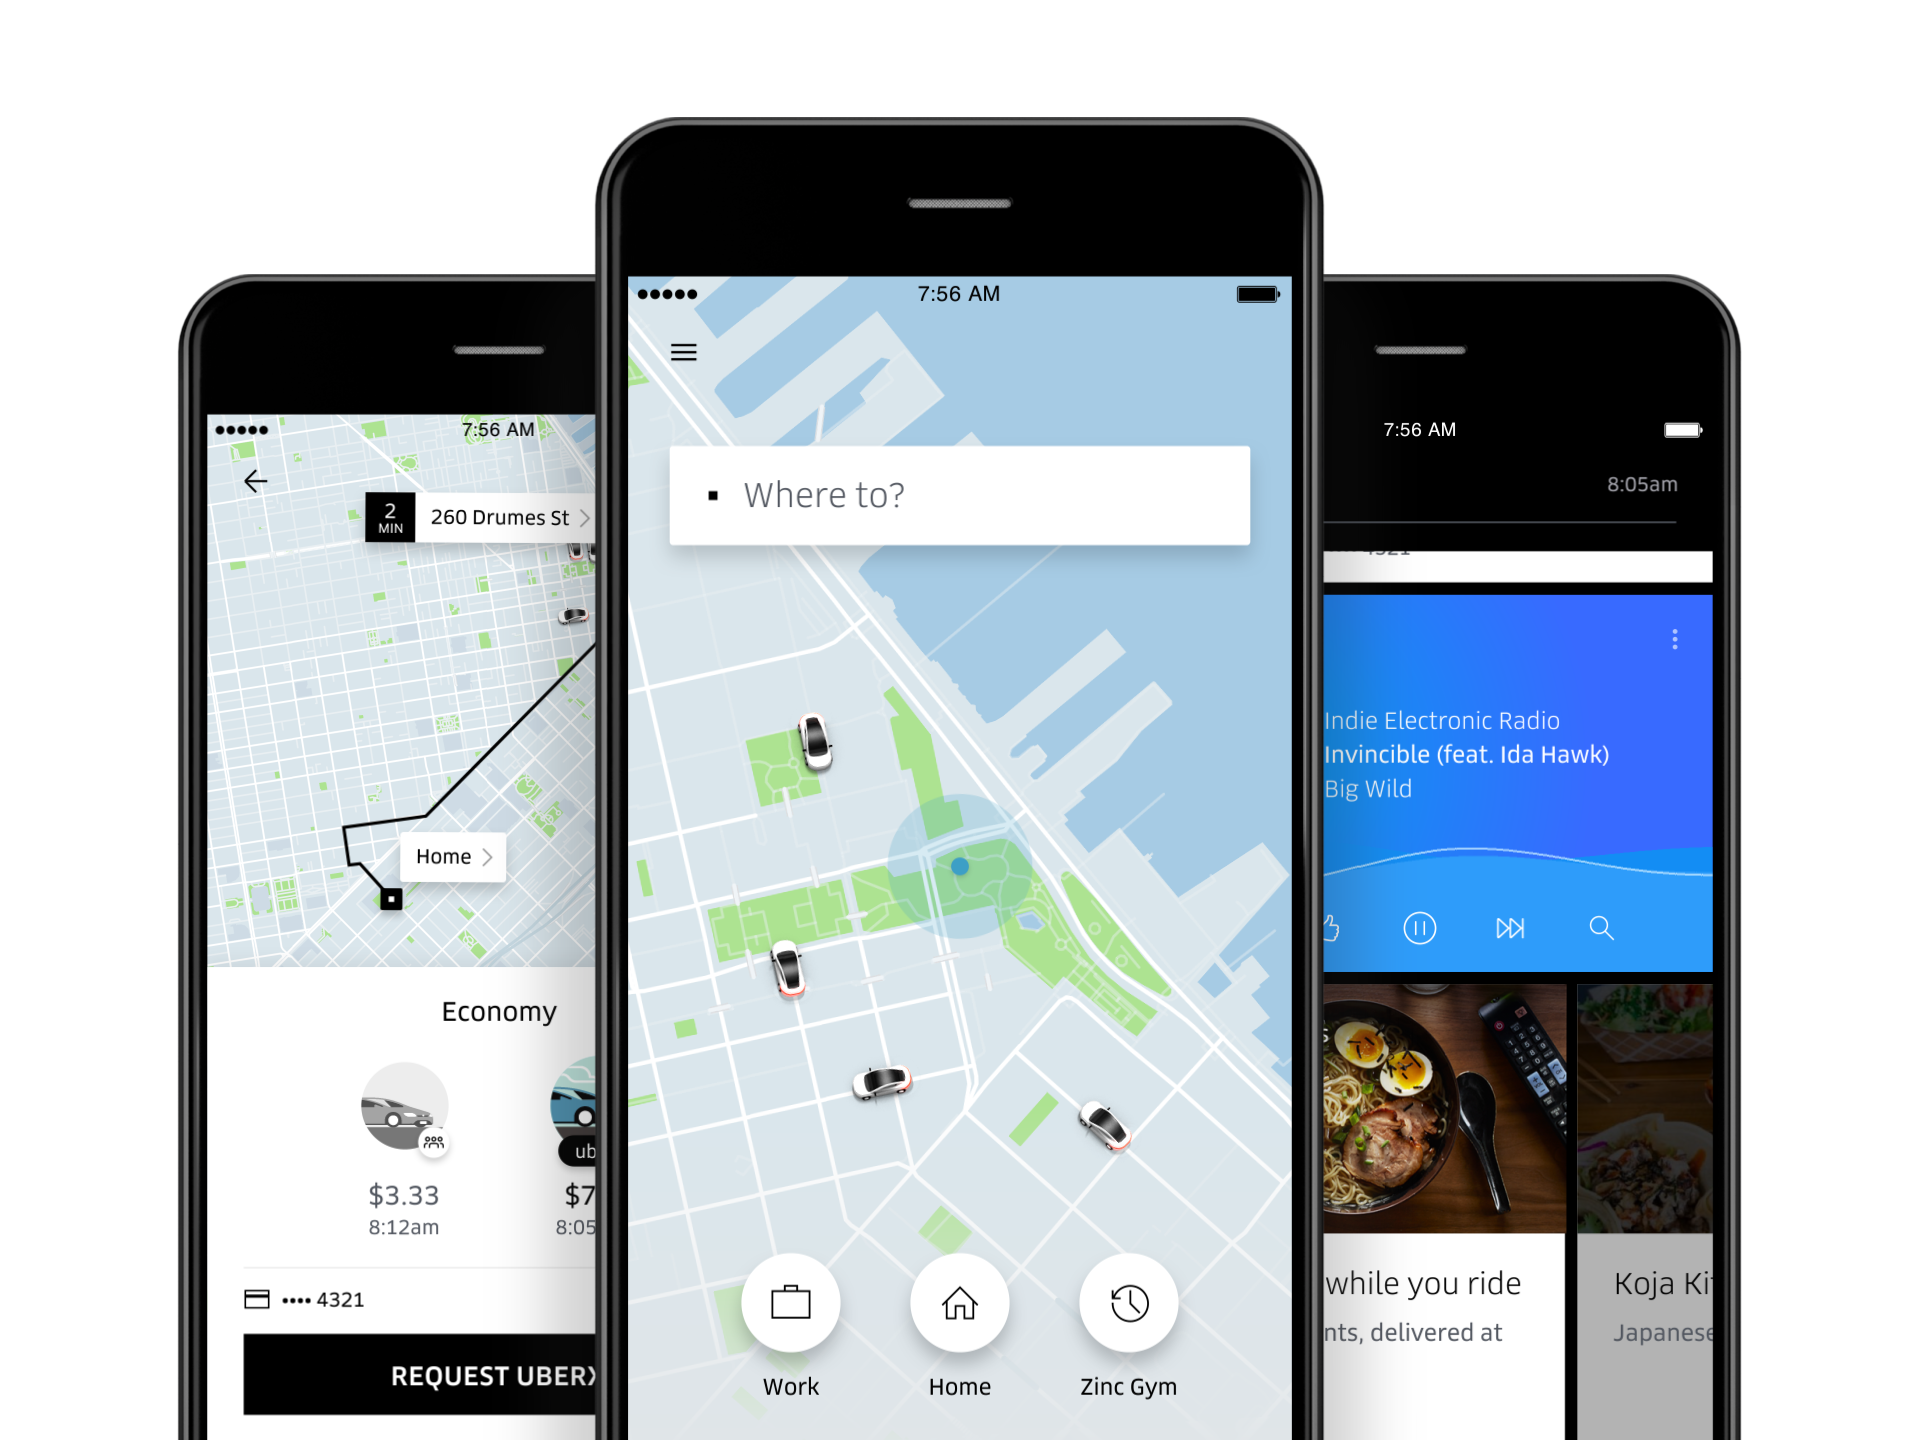 The updated Uber app will make suggestions about where a rider might want to go based on machine learning and new features like calendar integration. (Courtesy of Uber)